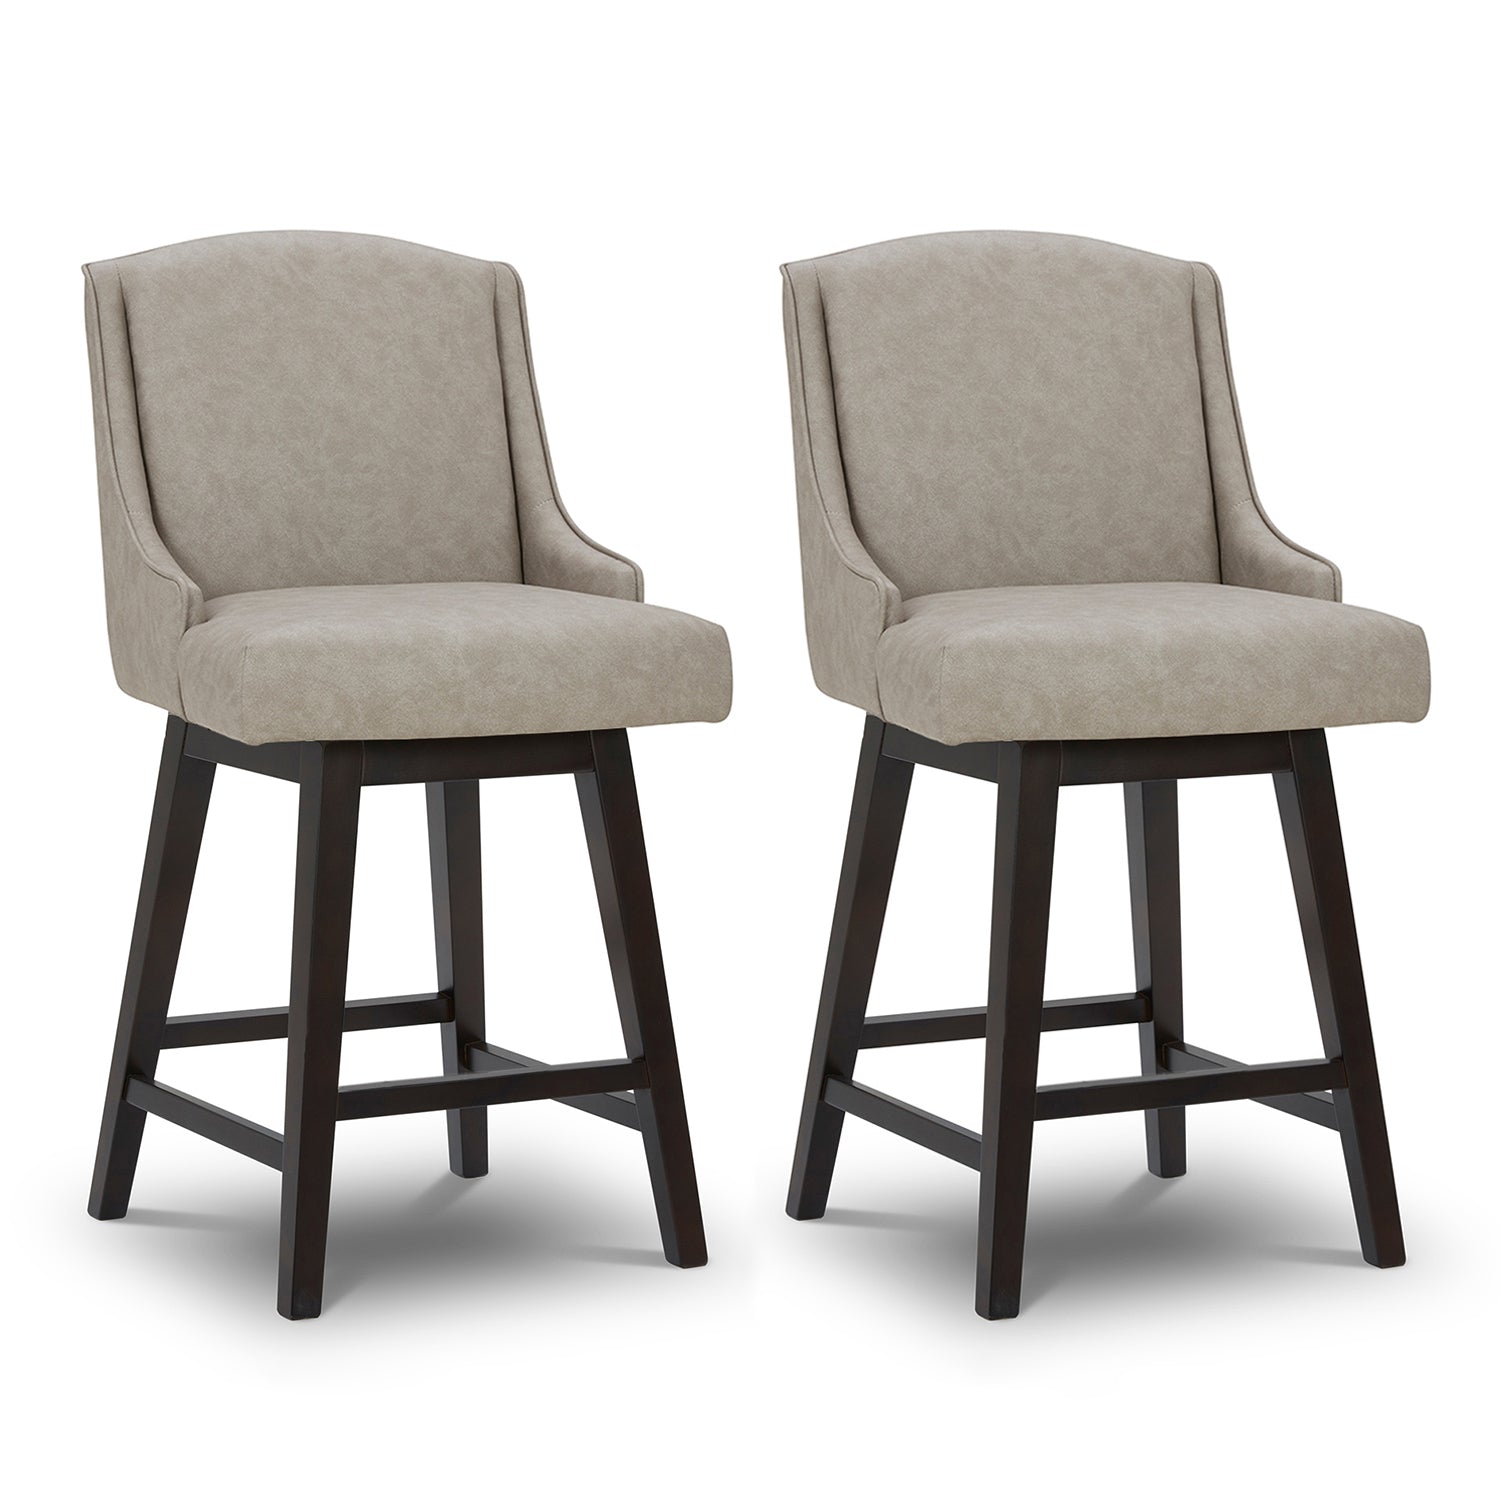 CHITA LIVING-Ryker Transitional Swivel Counter Stool - Fabric & Leather-Counter Stools-Faux Leather-Stone Gray-2 Pack